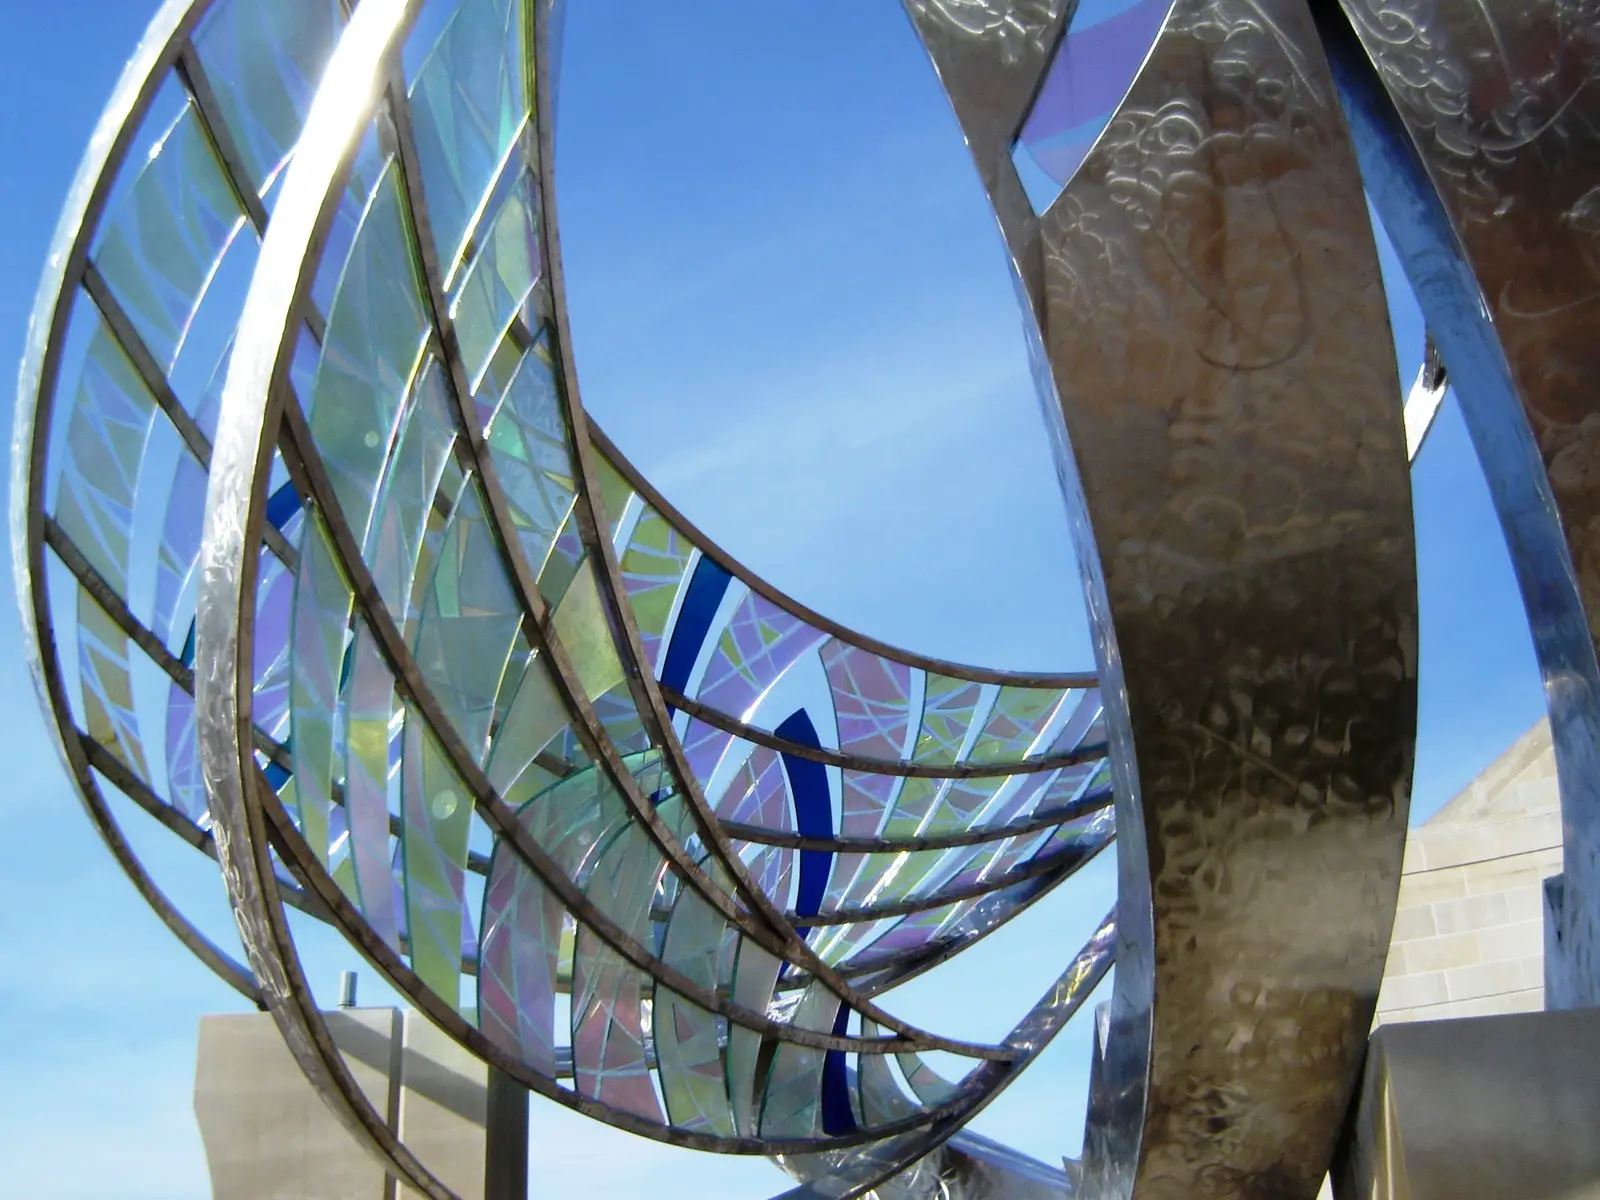 Glass and metal sculpture outside of Minnetrista with a blue sky background, the Ball Jar Company, in Muncie Indiana